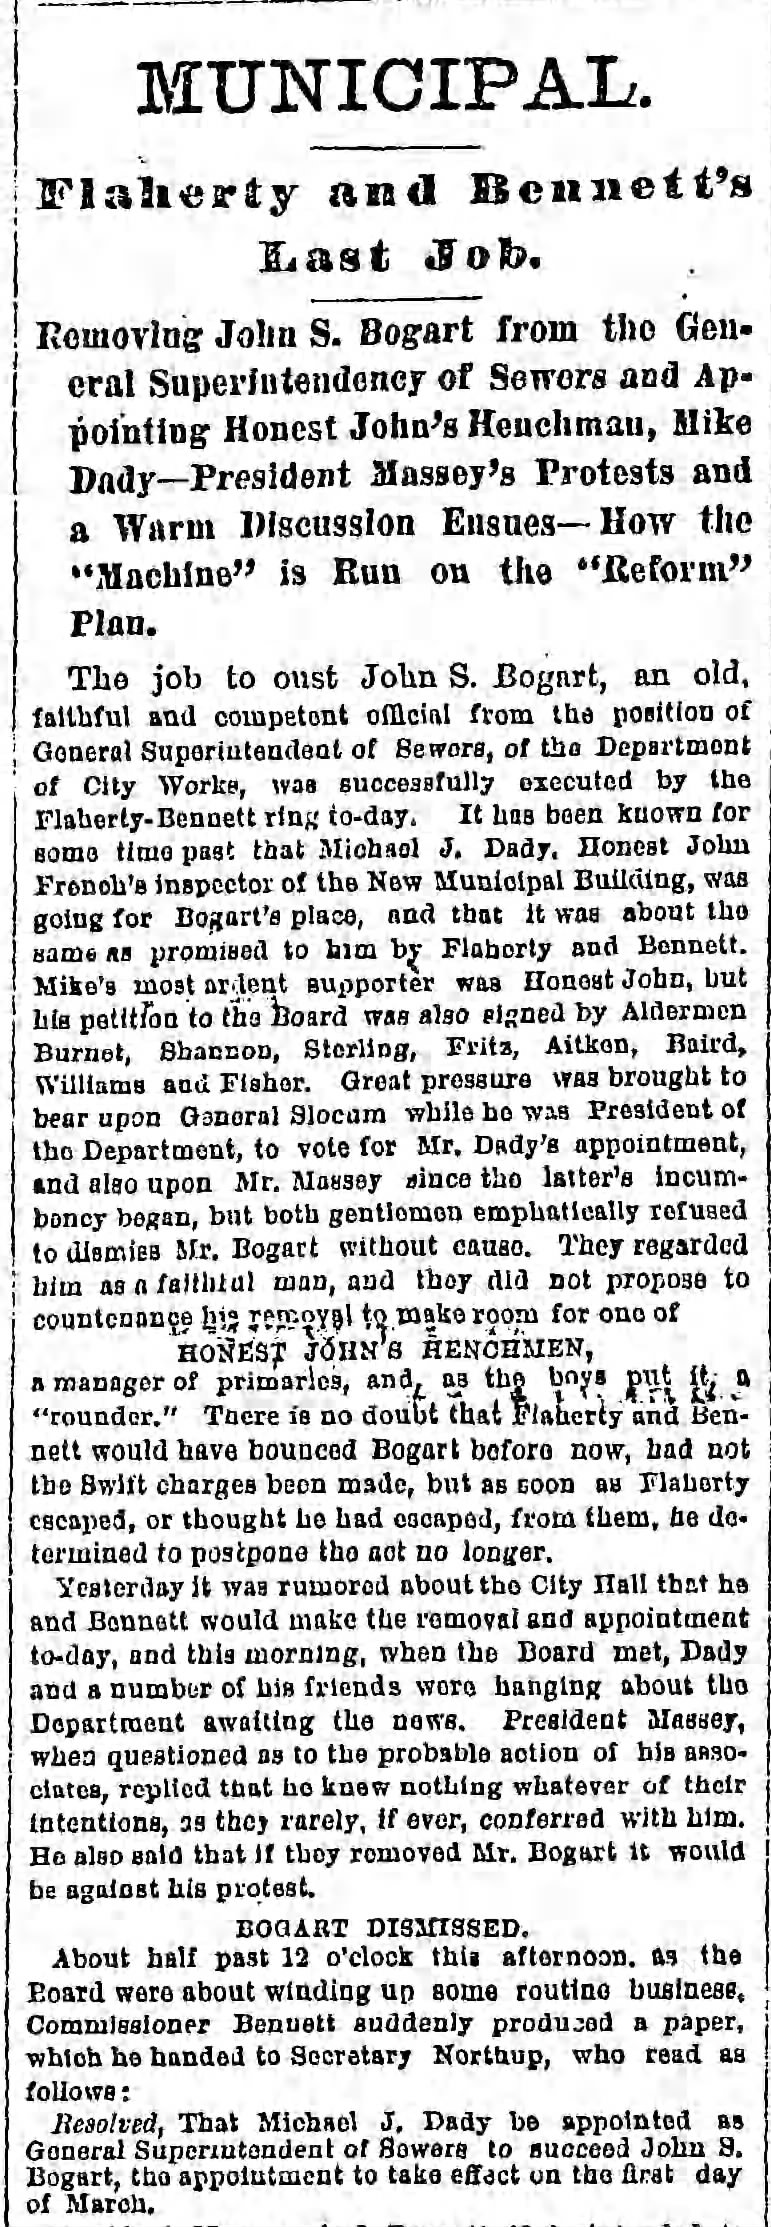 Thursday, February 14, 1878, Page 4